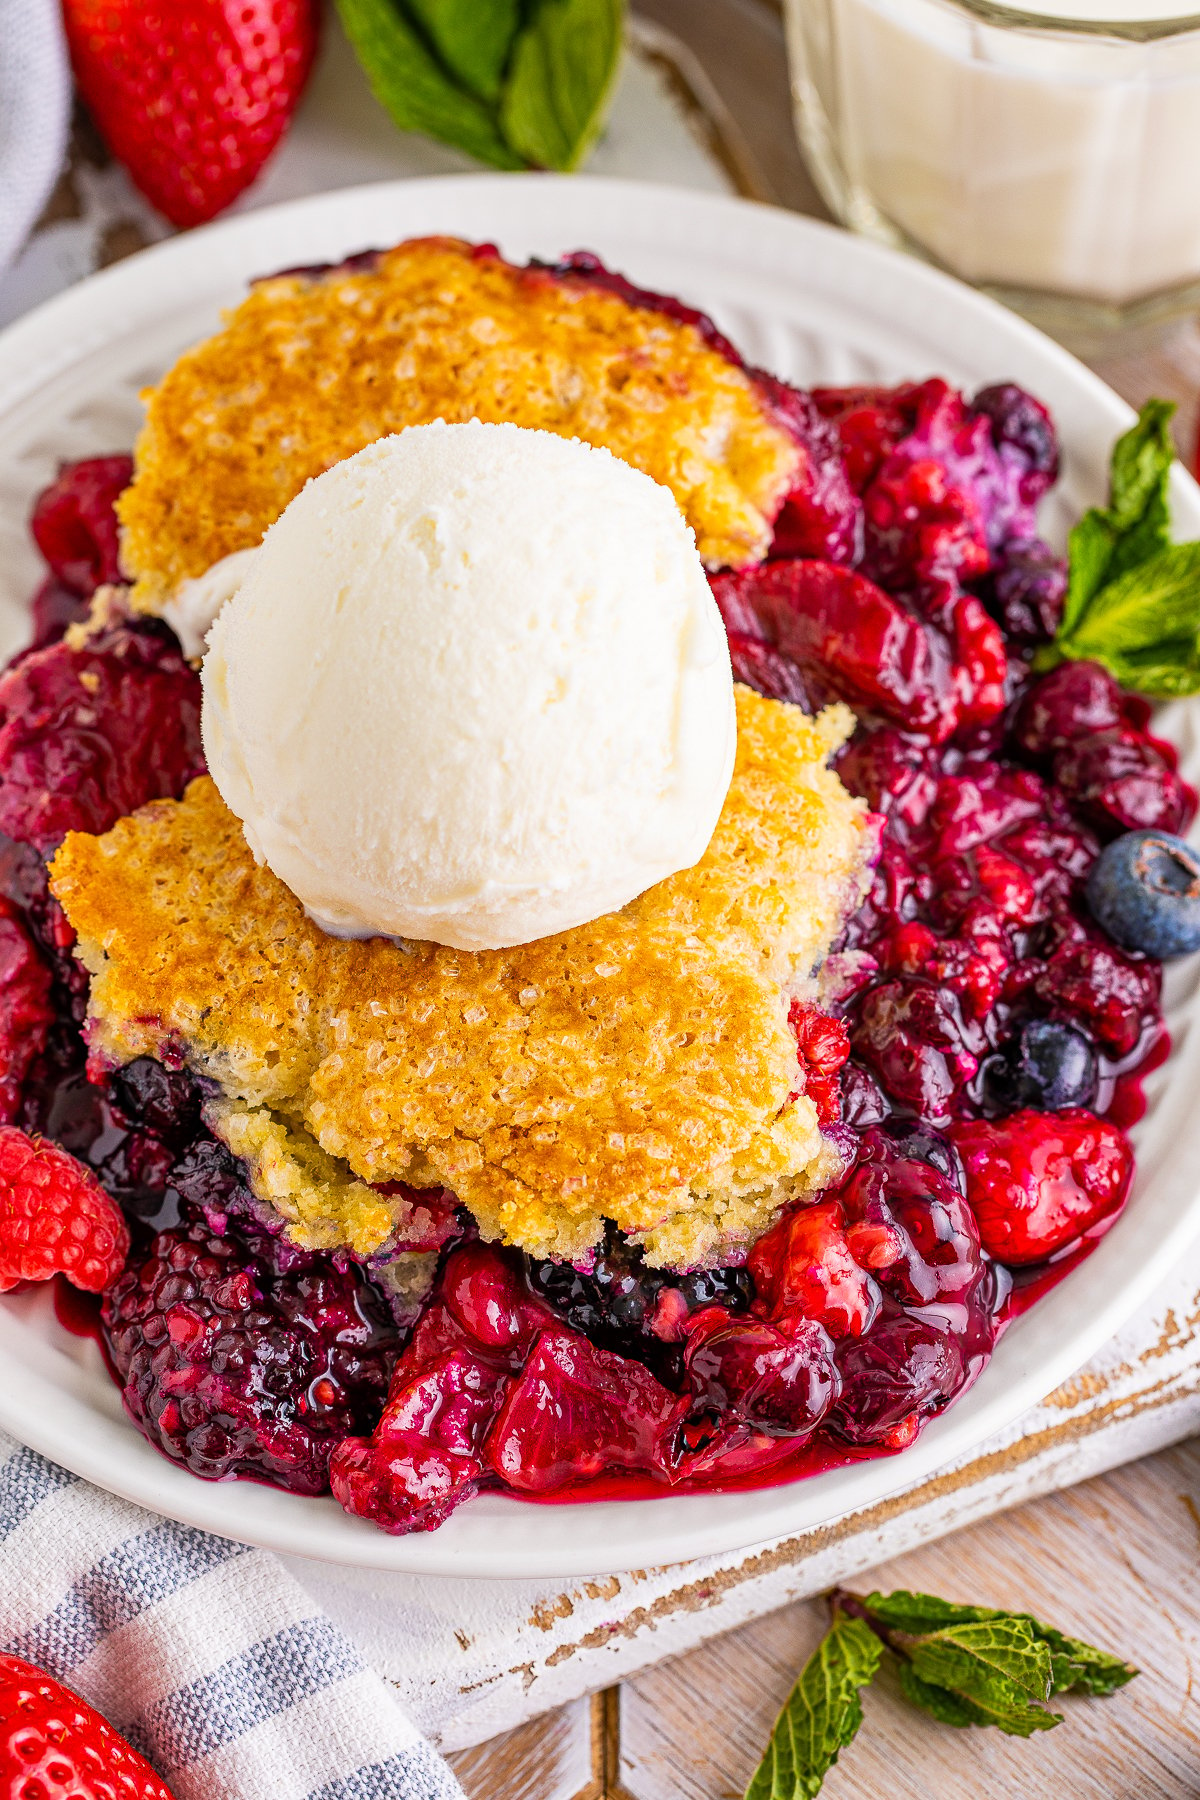 Overhead of Berry Cobbler on plate topped with ice cream.